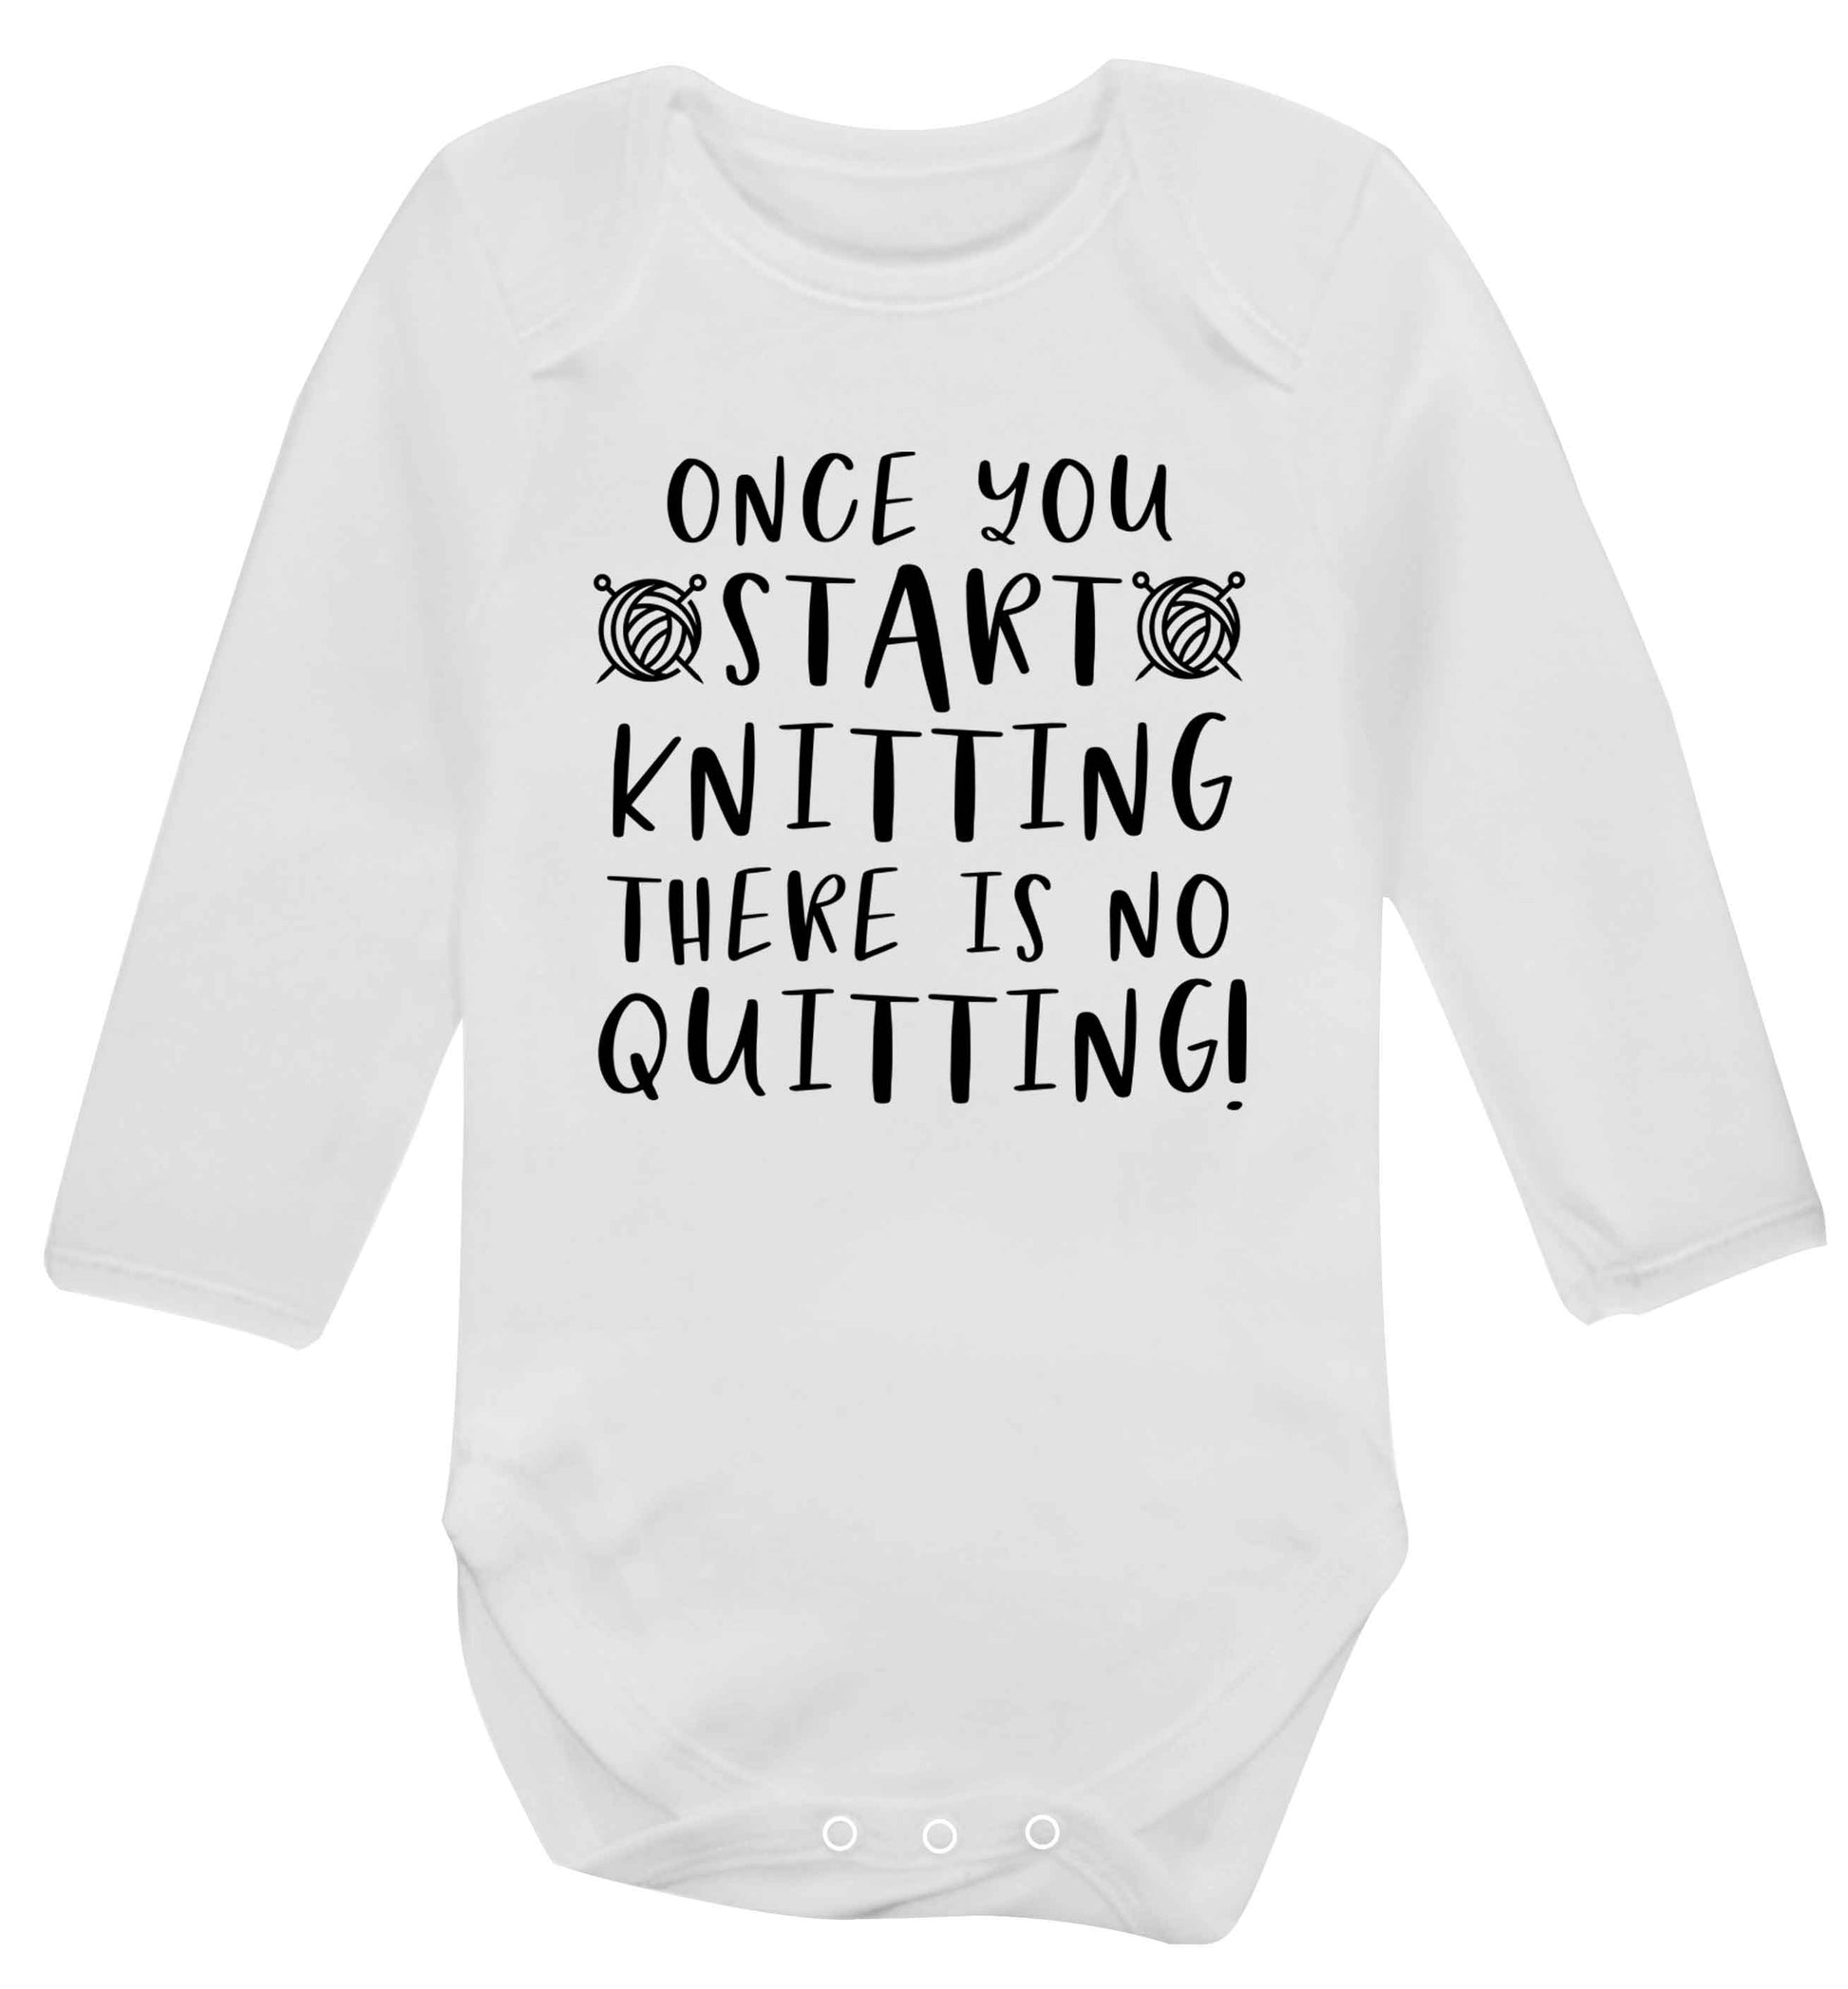 Once you start knitting there is no quitting! Baby Vest long sleeved white 6-12 months